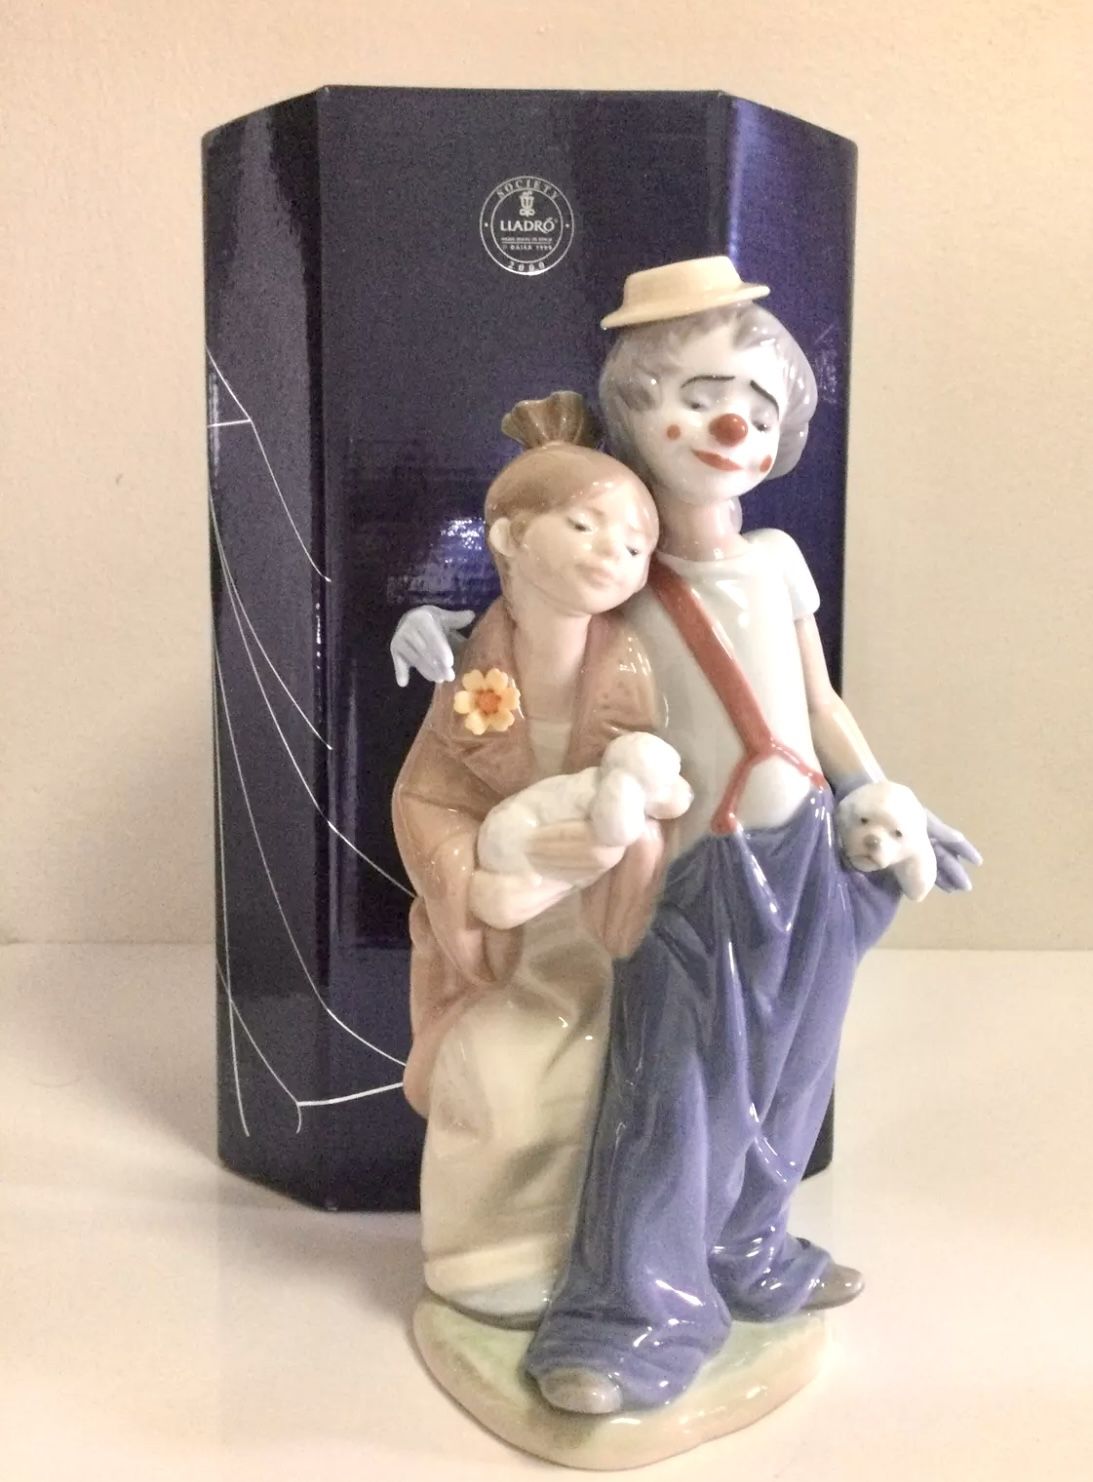 New Lladro Pals Forever 2000 Society Figurine Clown-Girl-Puppies 7686